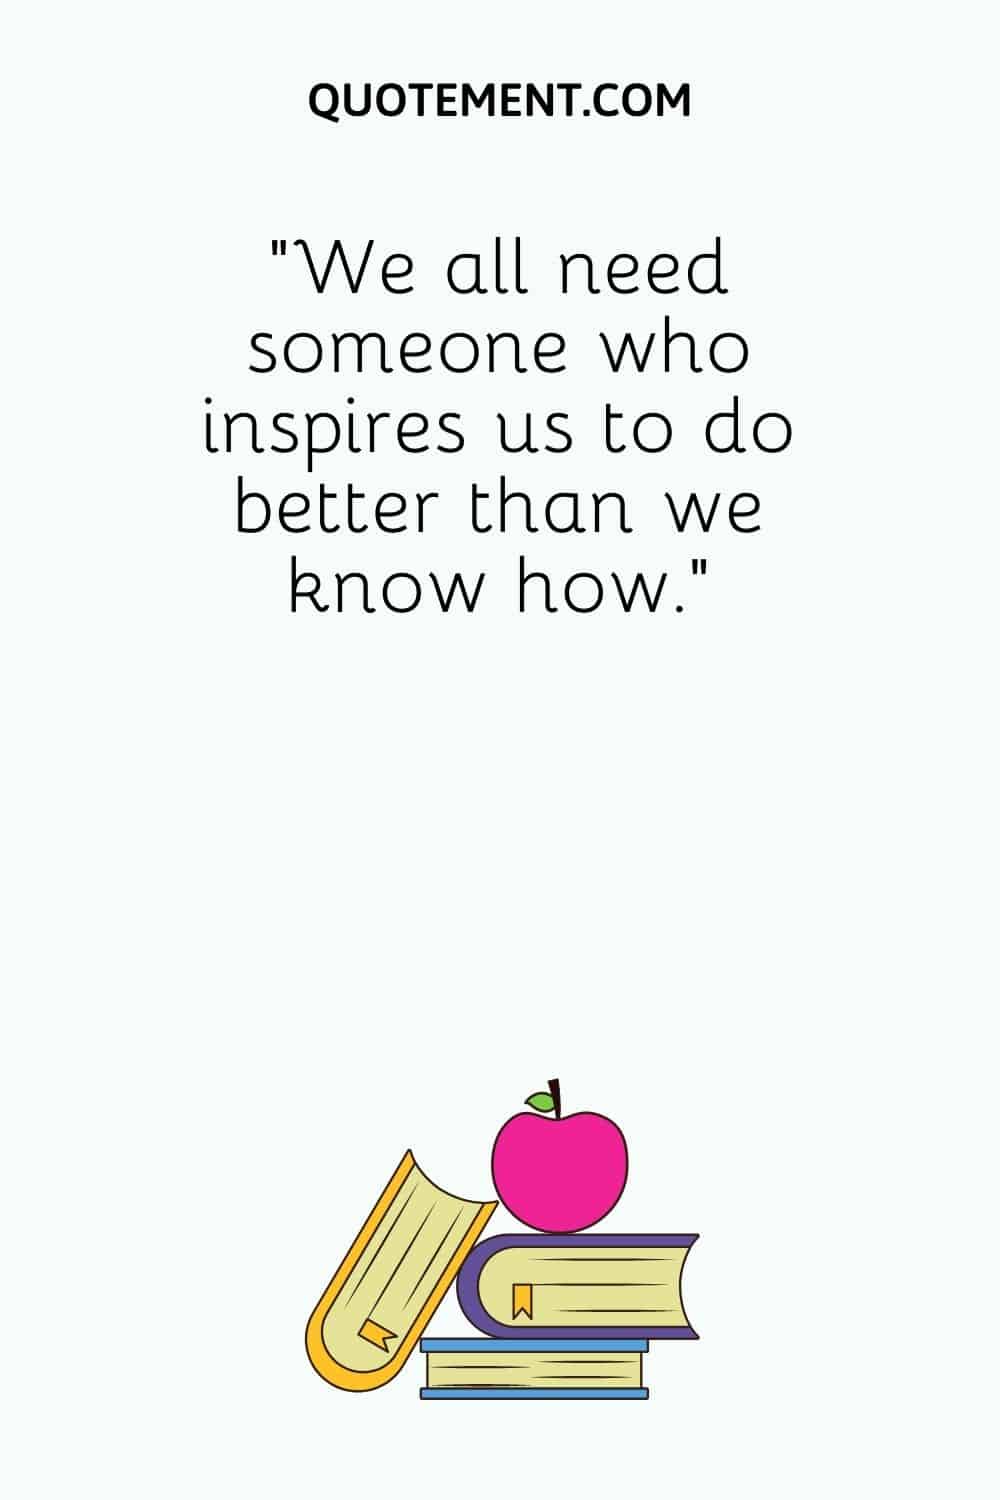 We all need someone who inspires us to do better than we know how